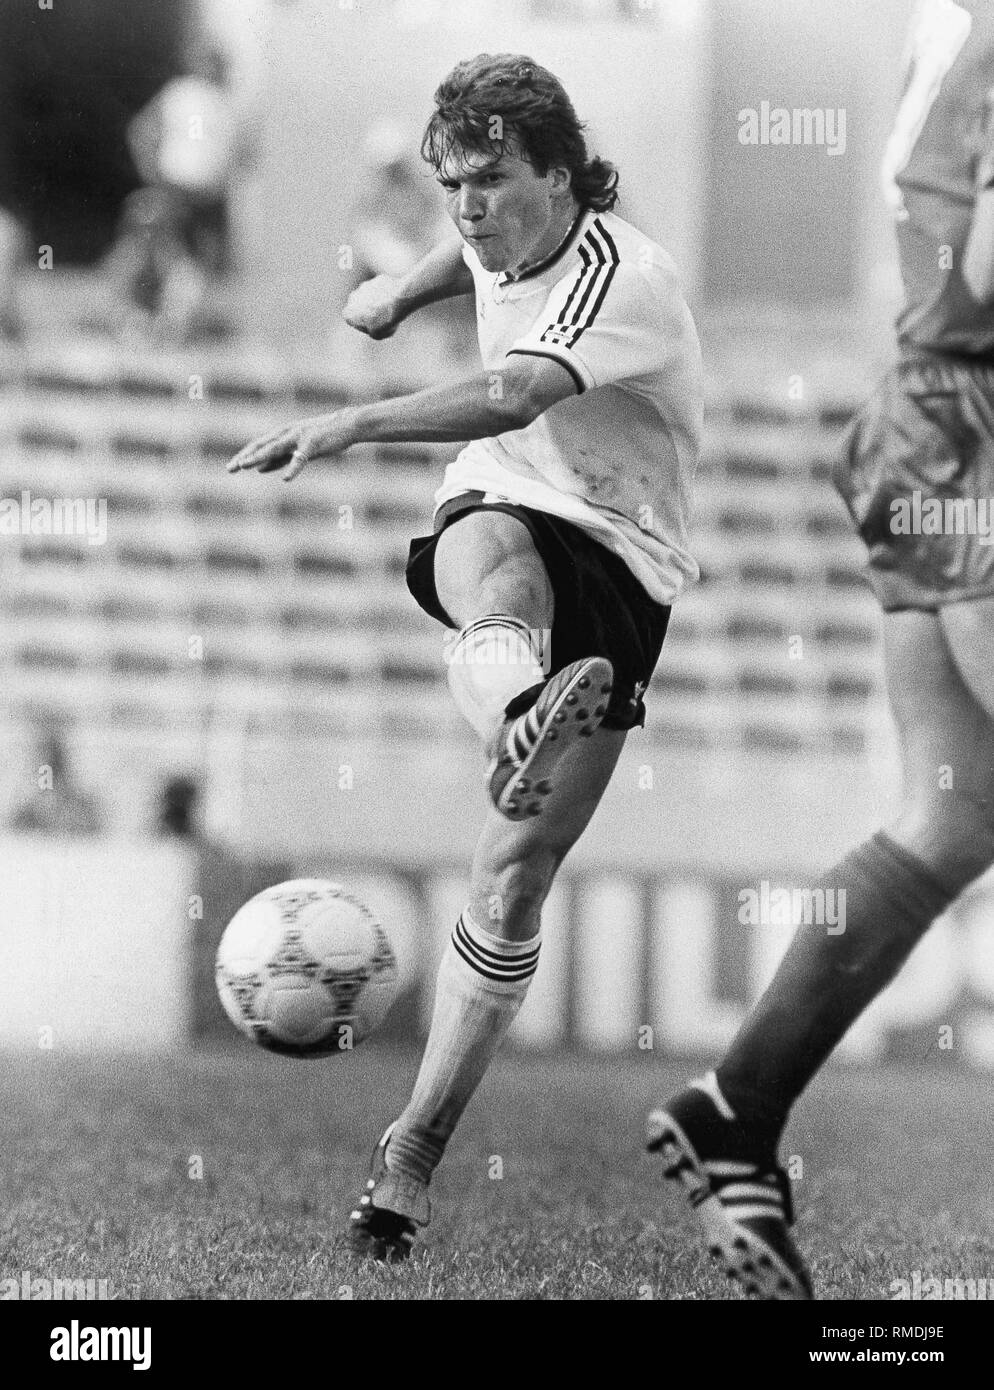 The football international Lothar Matthaeus in action at the Football World Cup in Mexico. Stock Photo